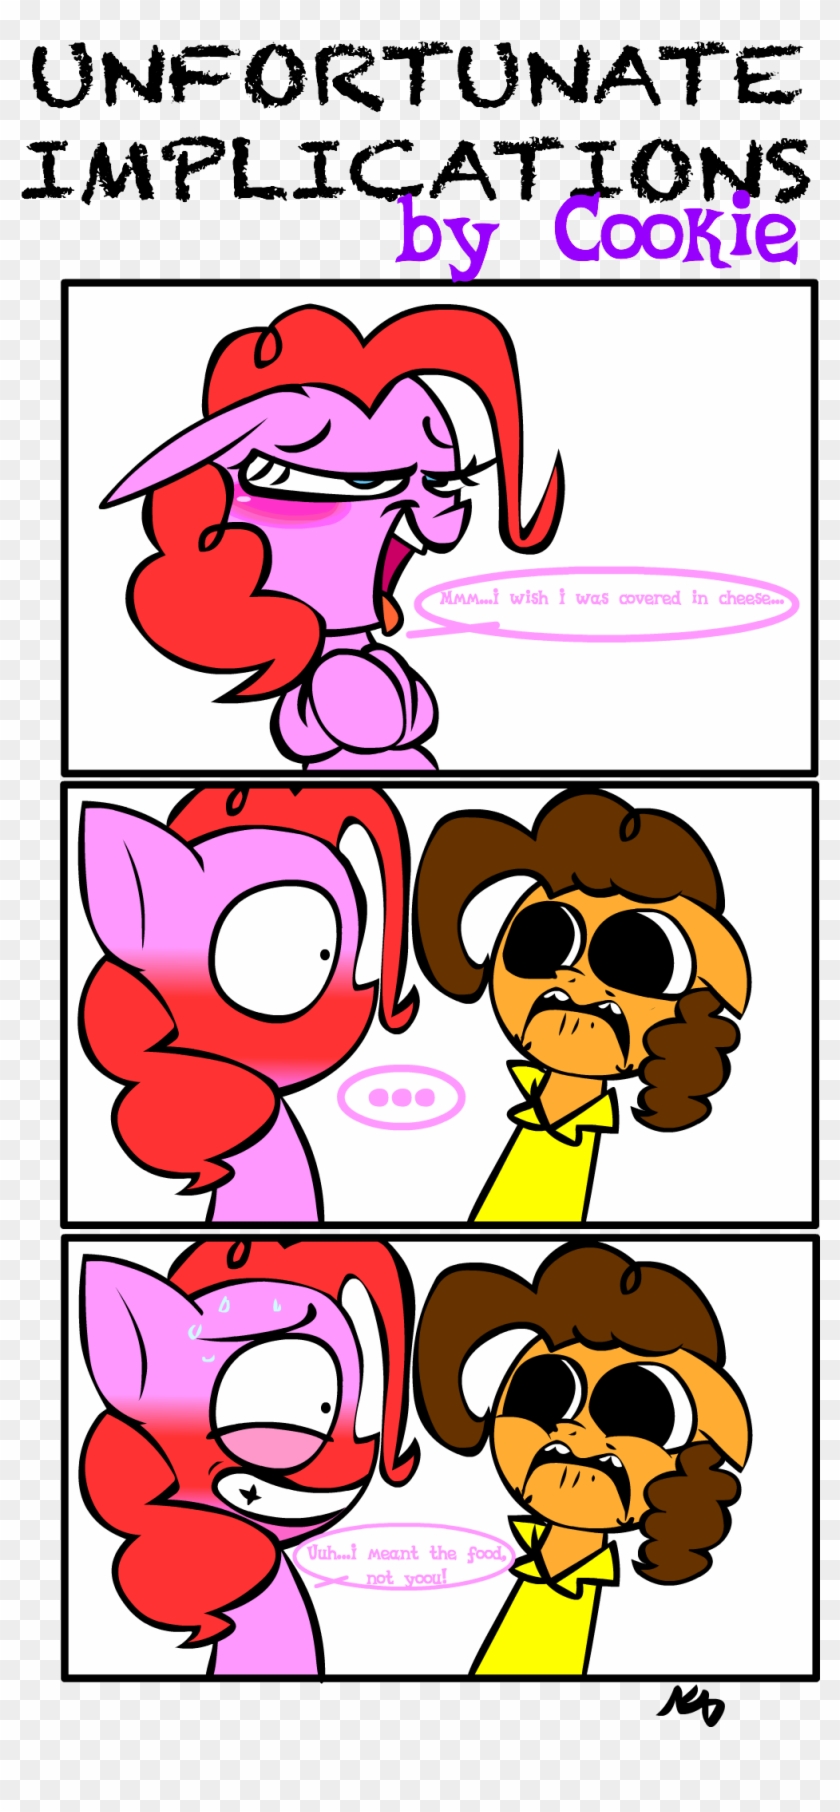 Unfortunate Implications Y Cookie Mm Wish I Was Covered - Pinkie Pie X Cheese Sandwich Comic #785479